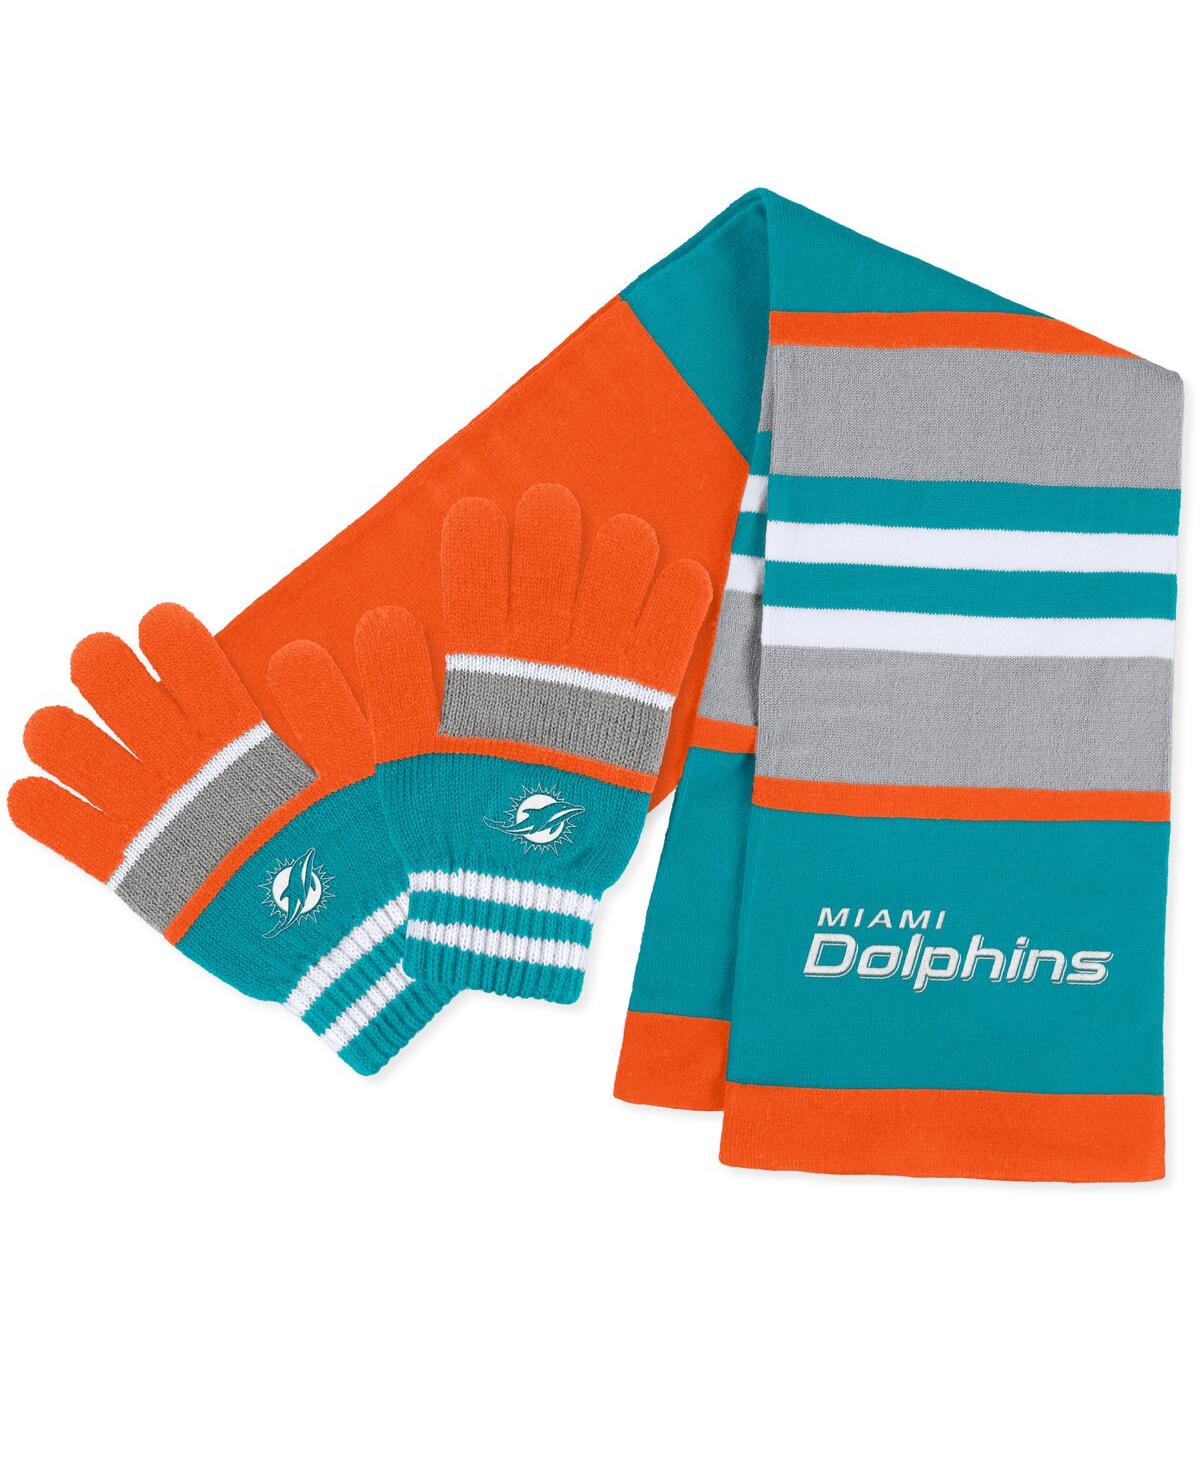 Women's Wear by Erin Andrews Miami Dolphins Stripe Glove and Scarf Set - Multi